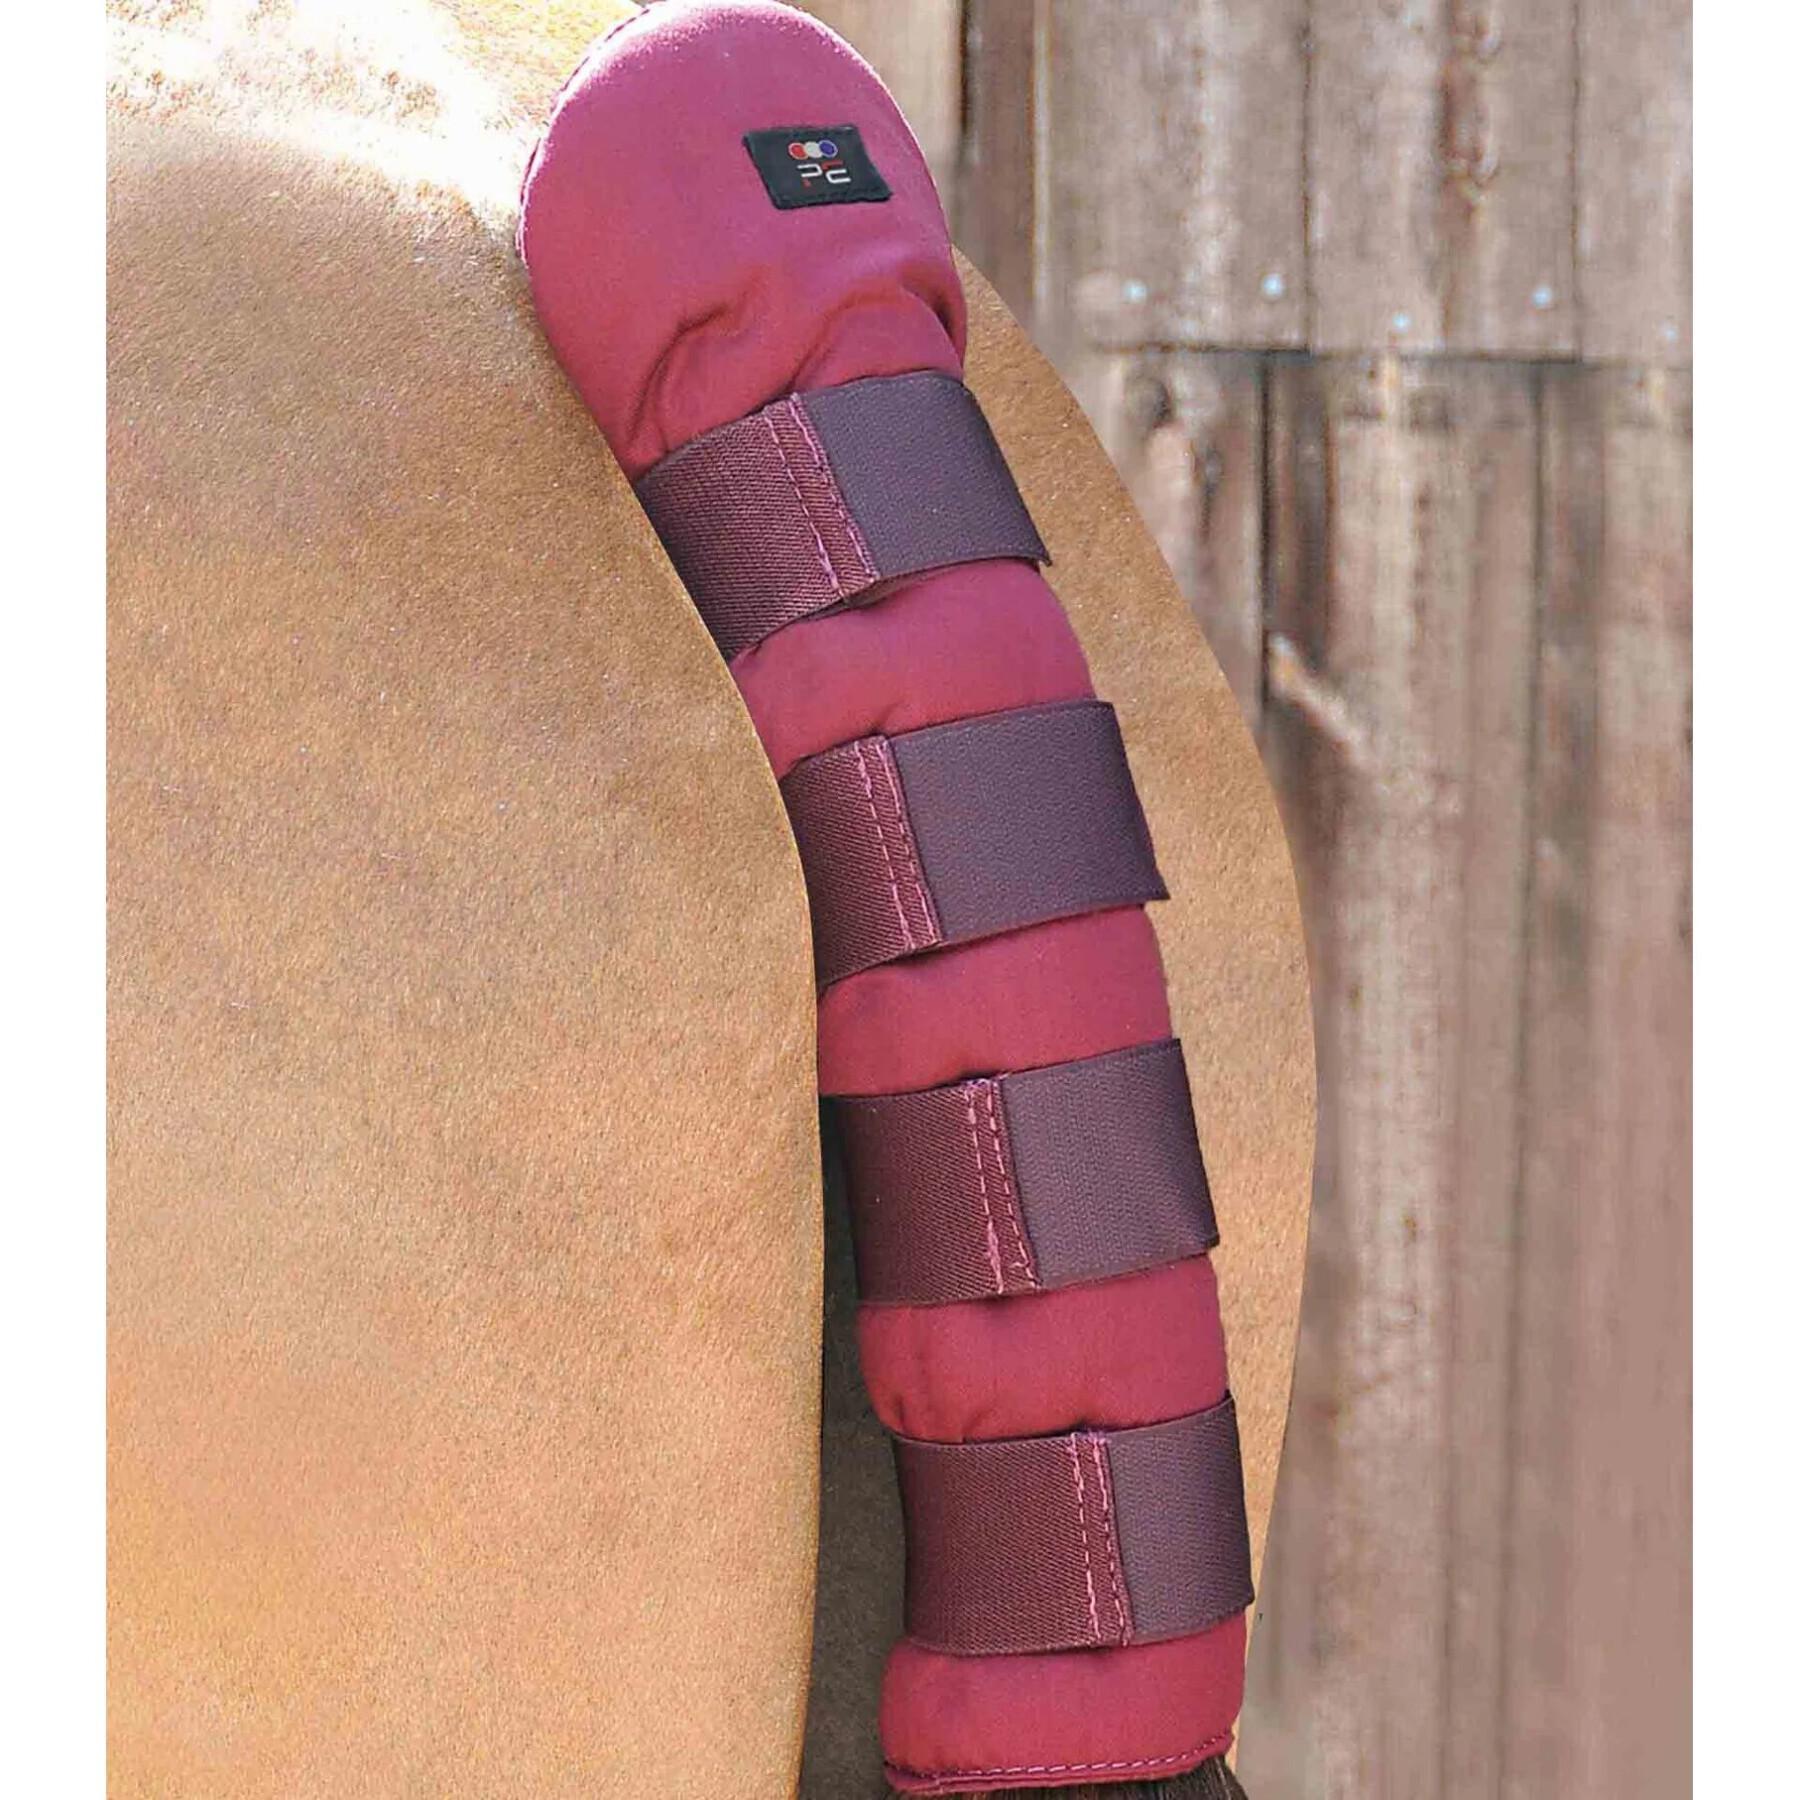 Tail Guard Premier Equine Stay-Up